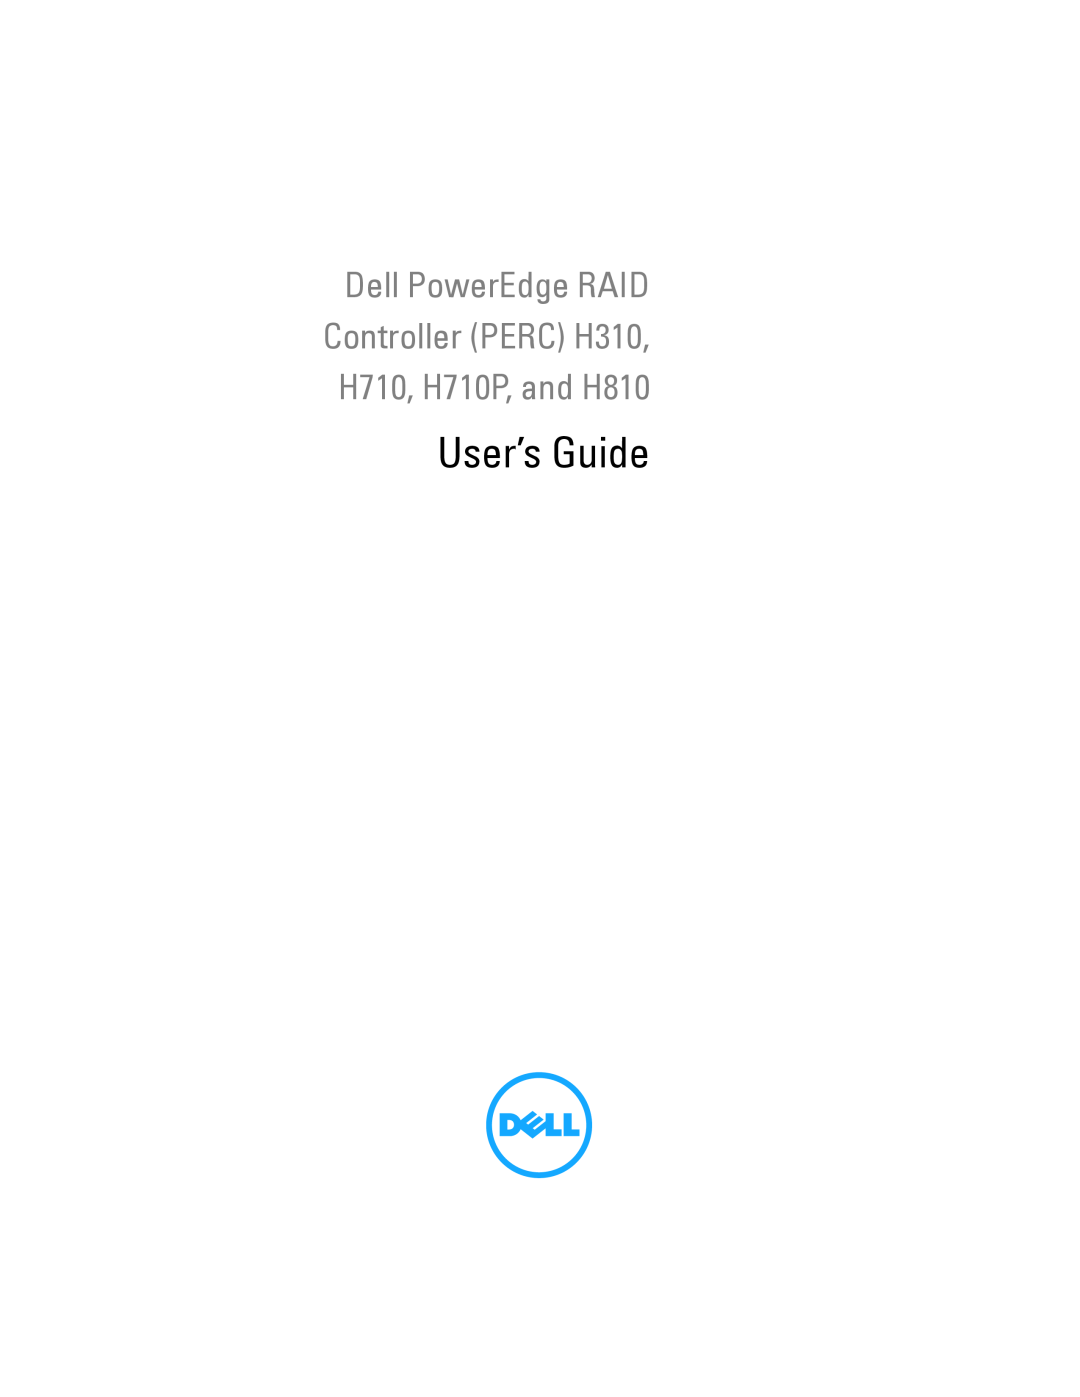 Dell manual User’s Guide, Dell PowerEdge RAID Controller PERC H310 H710, H710P, and H810 